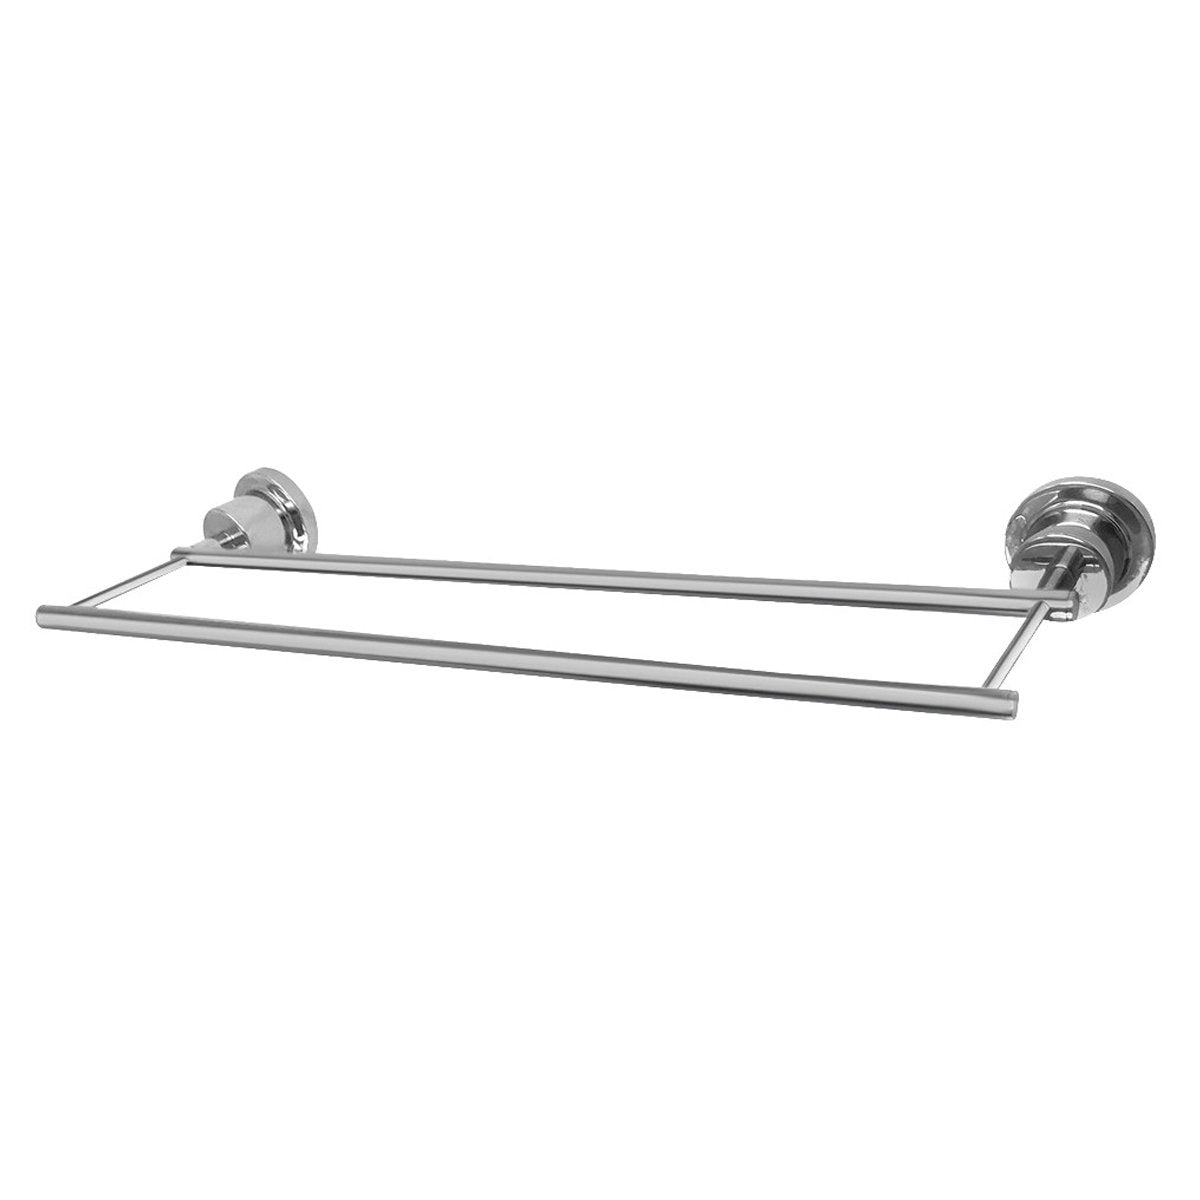 Kingston Brass Concord 18-Inch Double Towel Bar